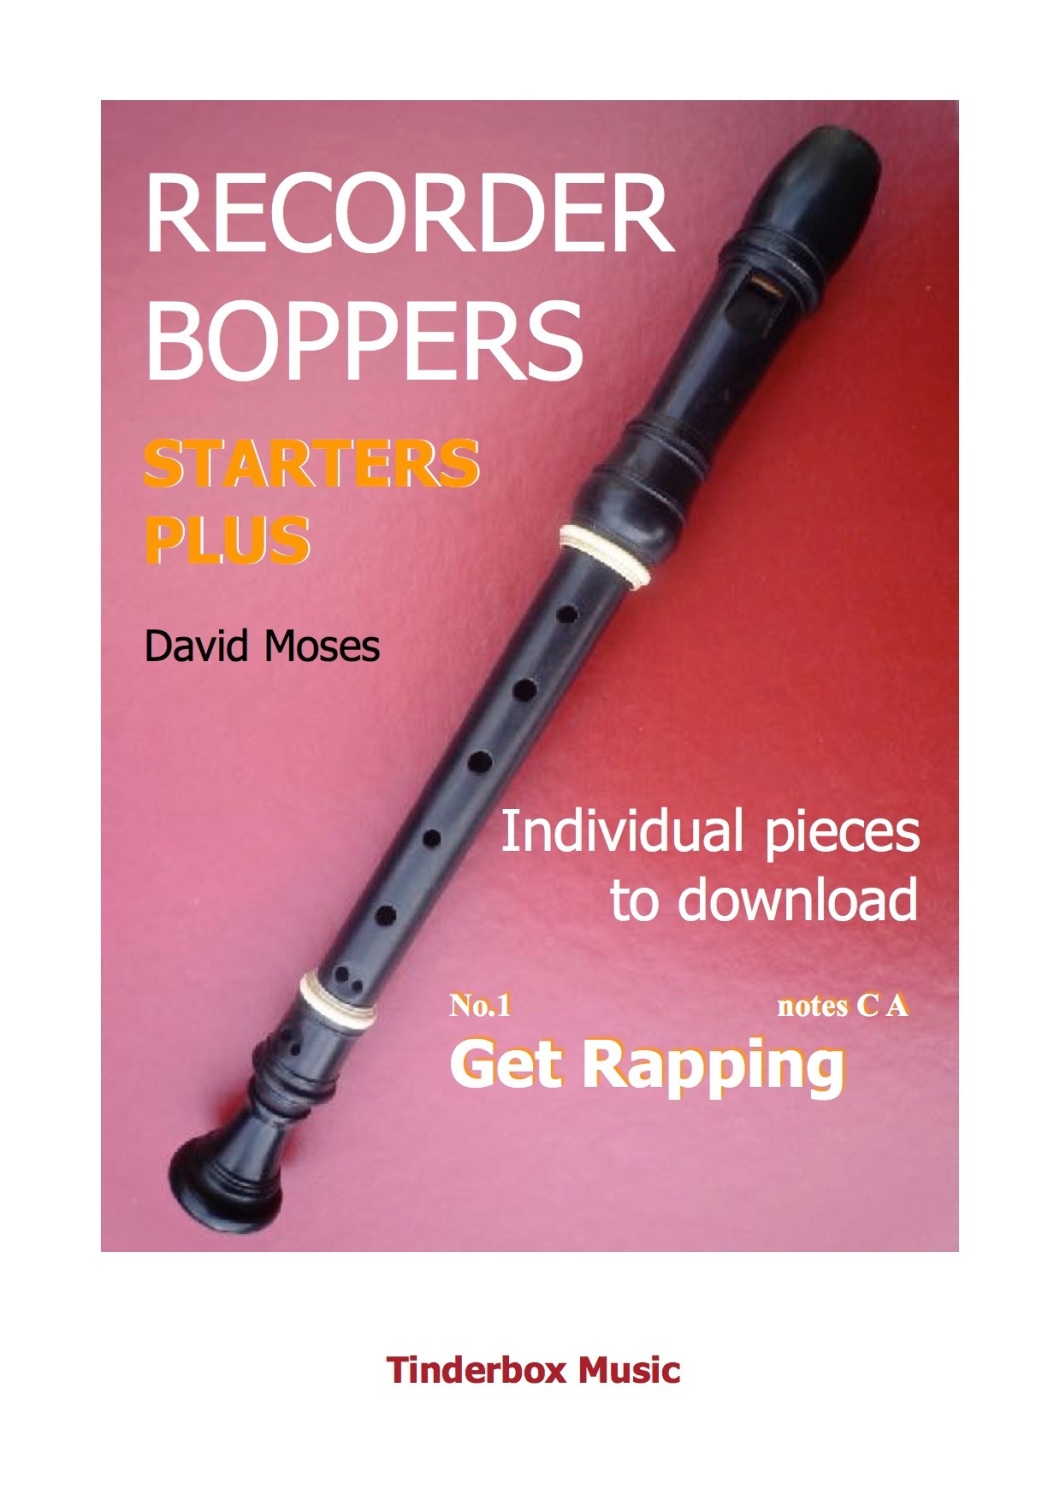 STARTERS PLUS Performance pieces 1 GET RAPPING download